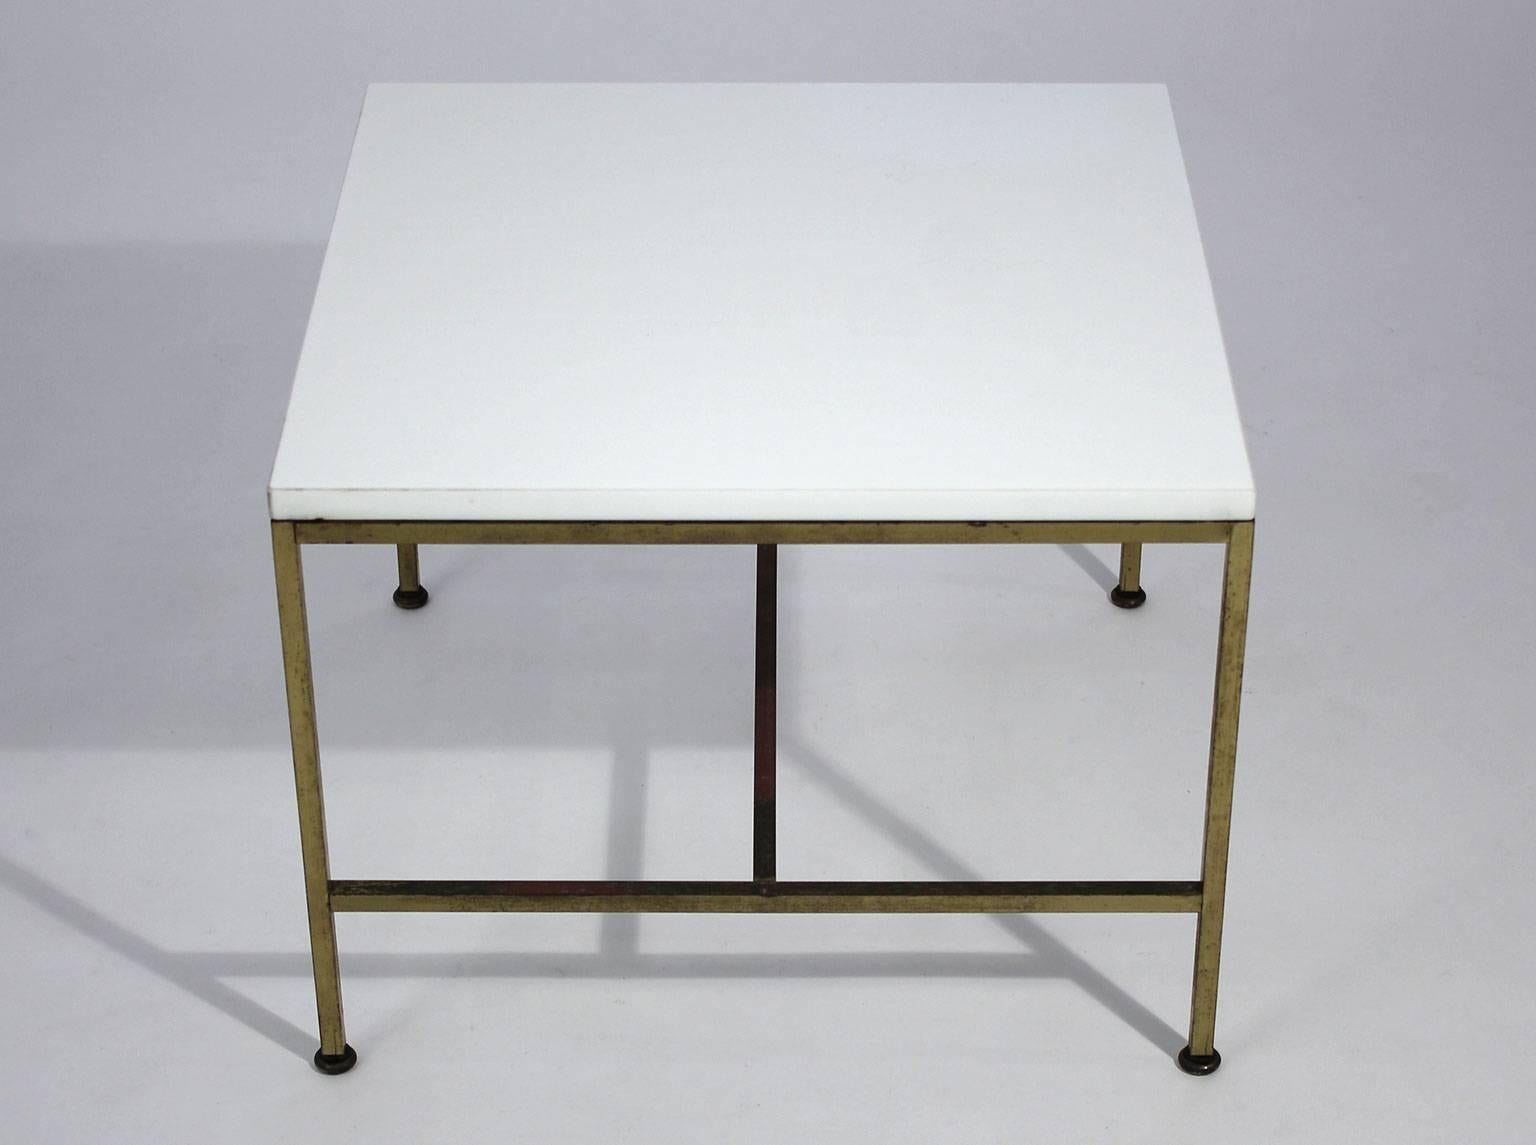 Paul McCobb for Calvin Furniture brass side table with original white Vitrolite glass. Table has all the original feet and the brass has a wonderful patina from age. Can be polished if desired. The top Vitrolite glass is in excellent shape with no